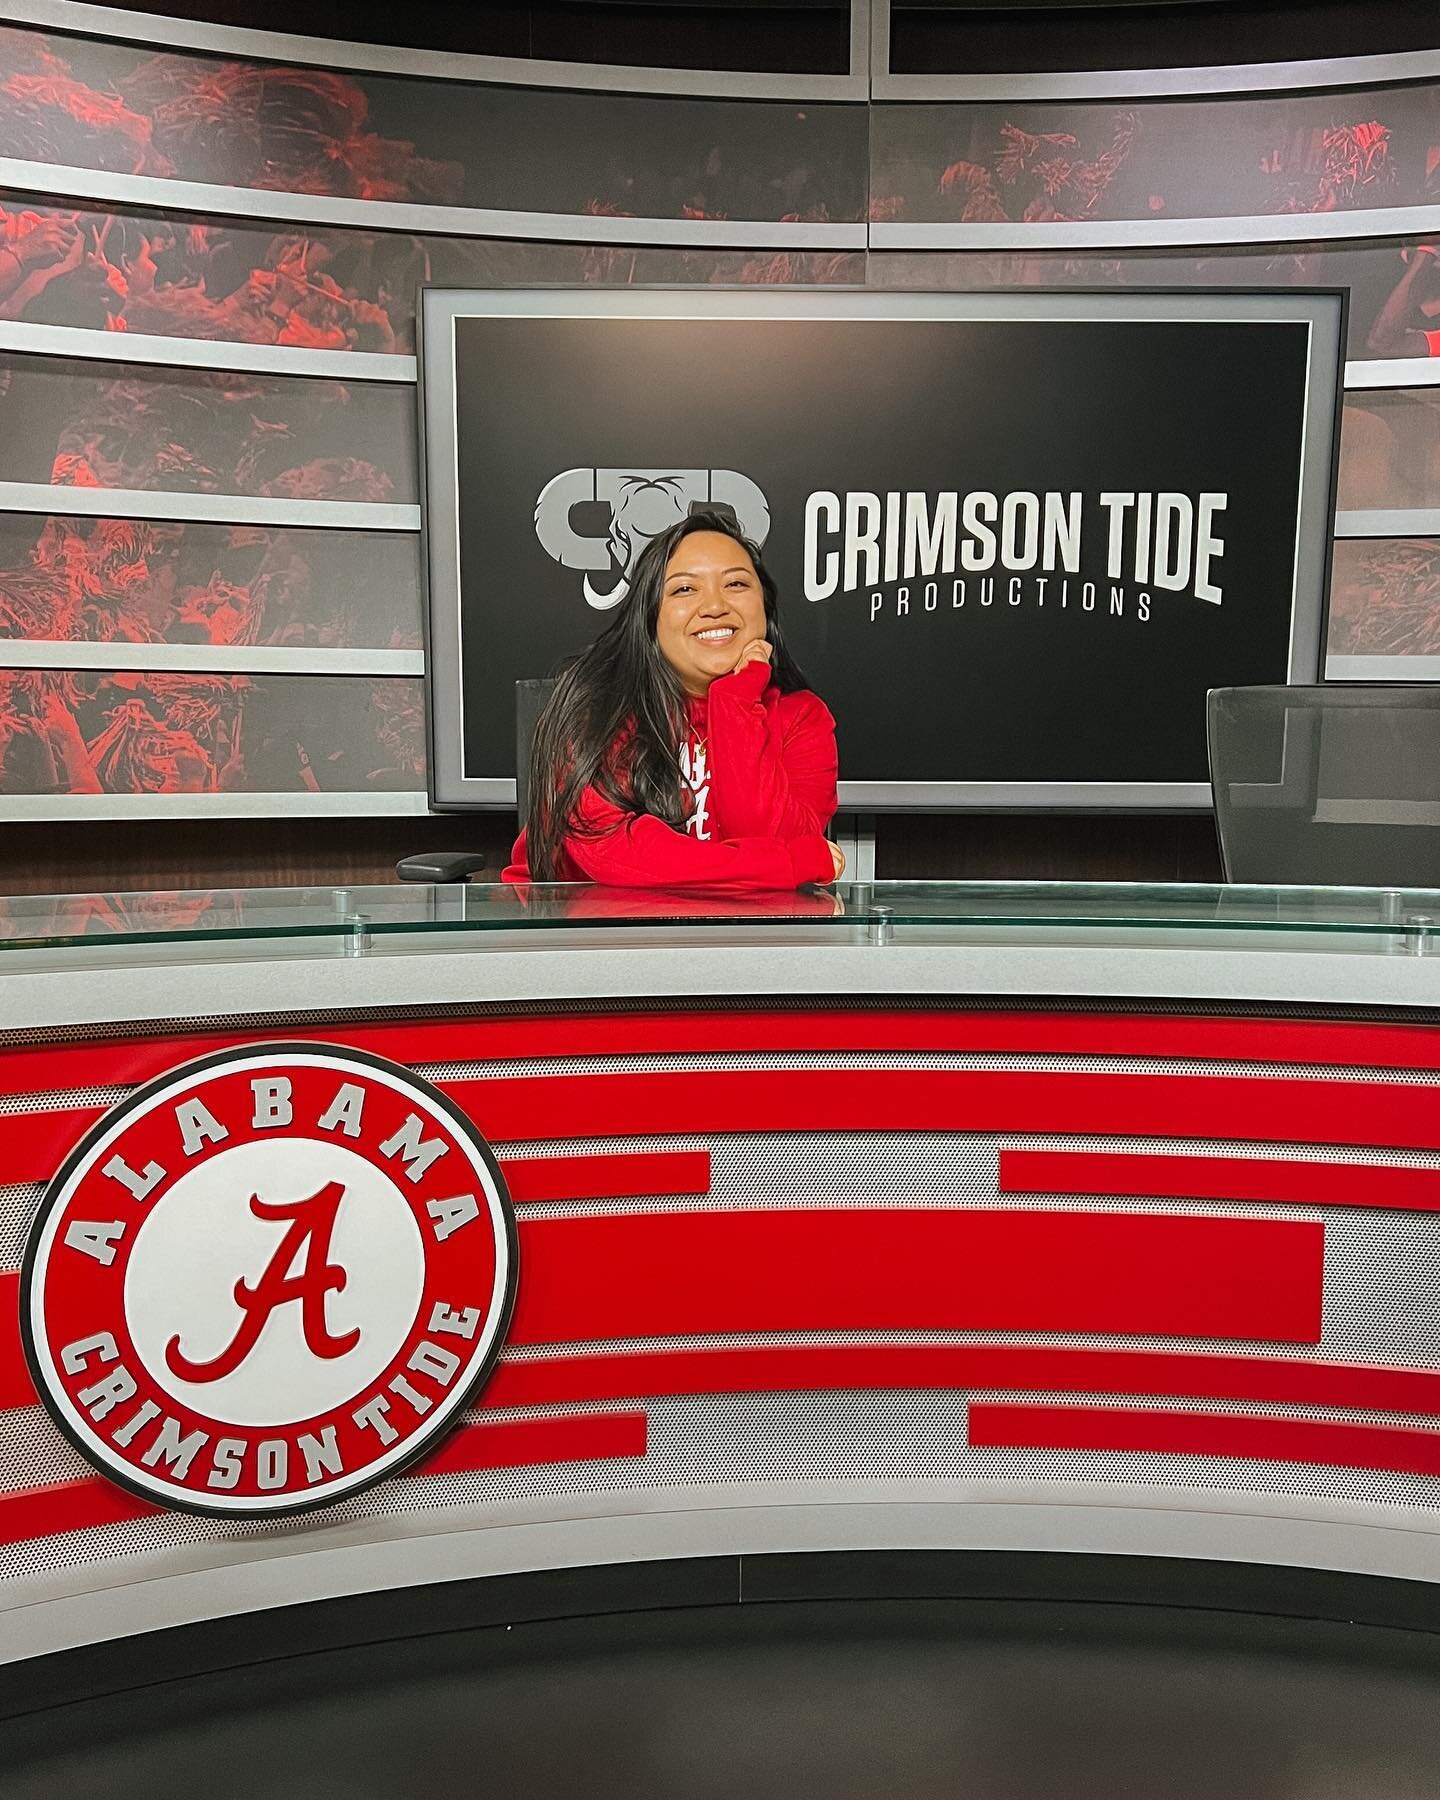 ROLL TIDE 🌊✨

Had an AMAZING time at the University of Alabama! Loved having the opportunity to chat with students and inspire them to pursue a creative career with the help of Adobe Express! Ngl, this was one of the more challenging trips I&rsquo;v